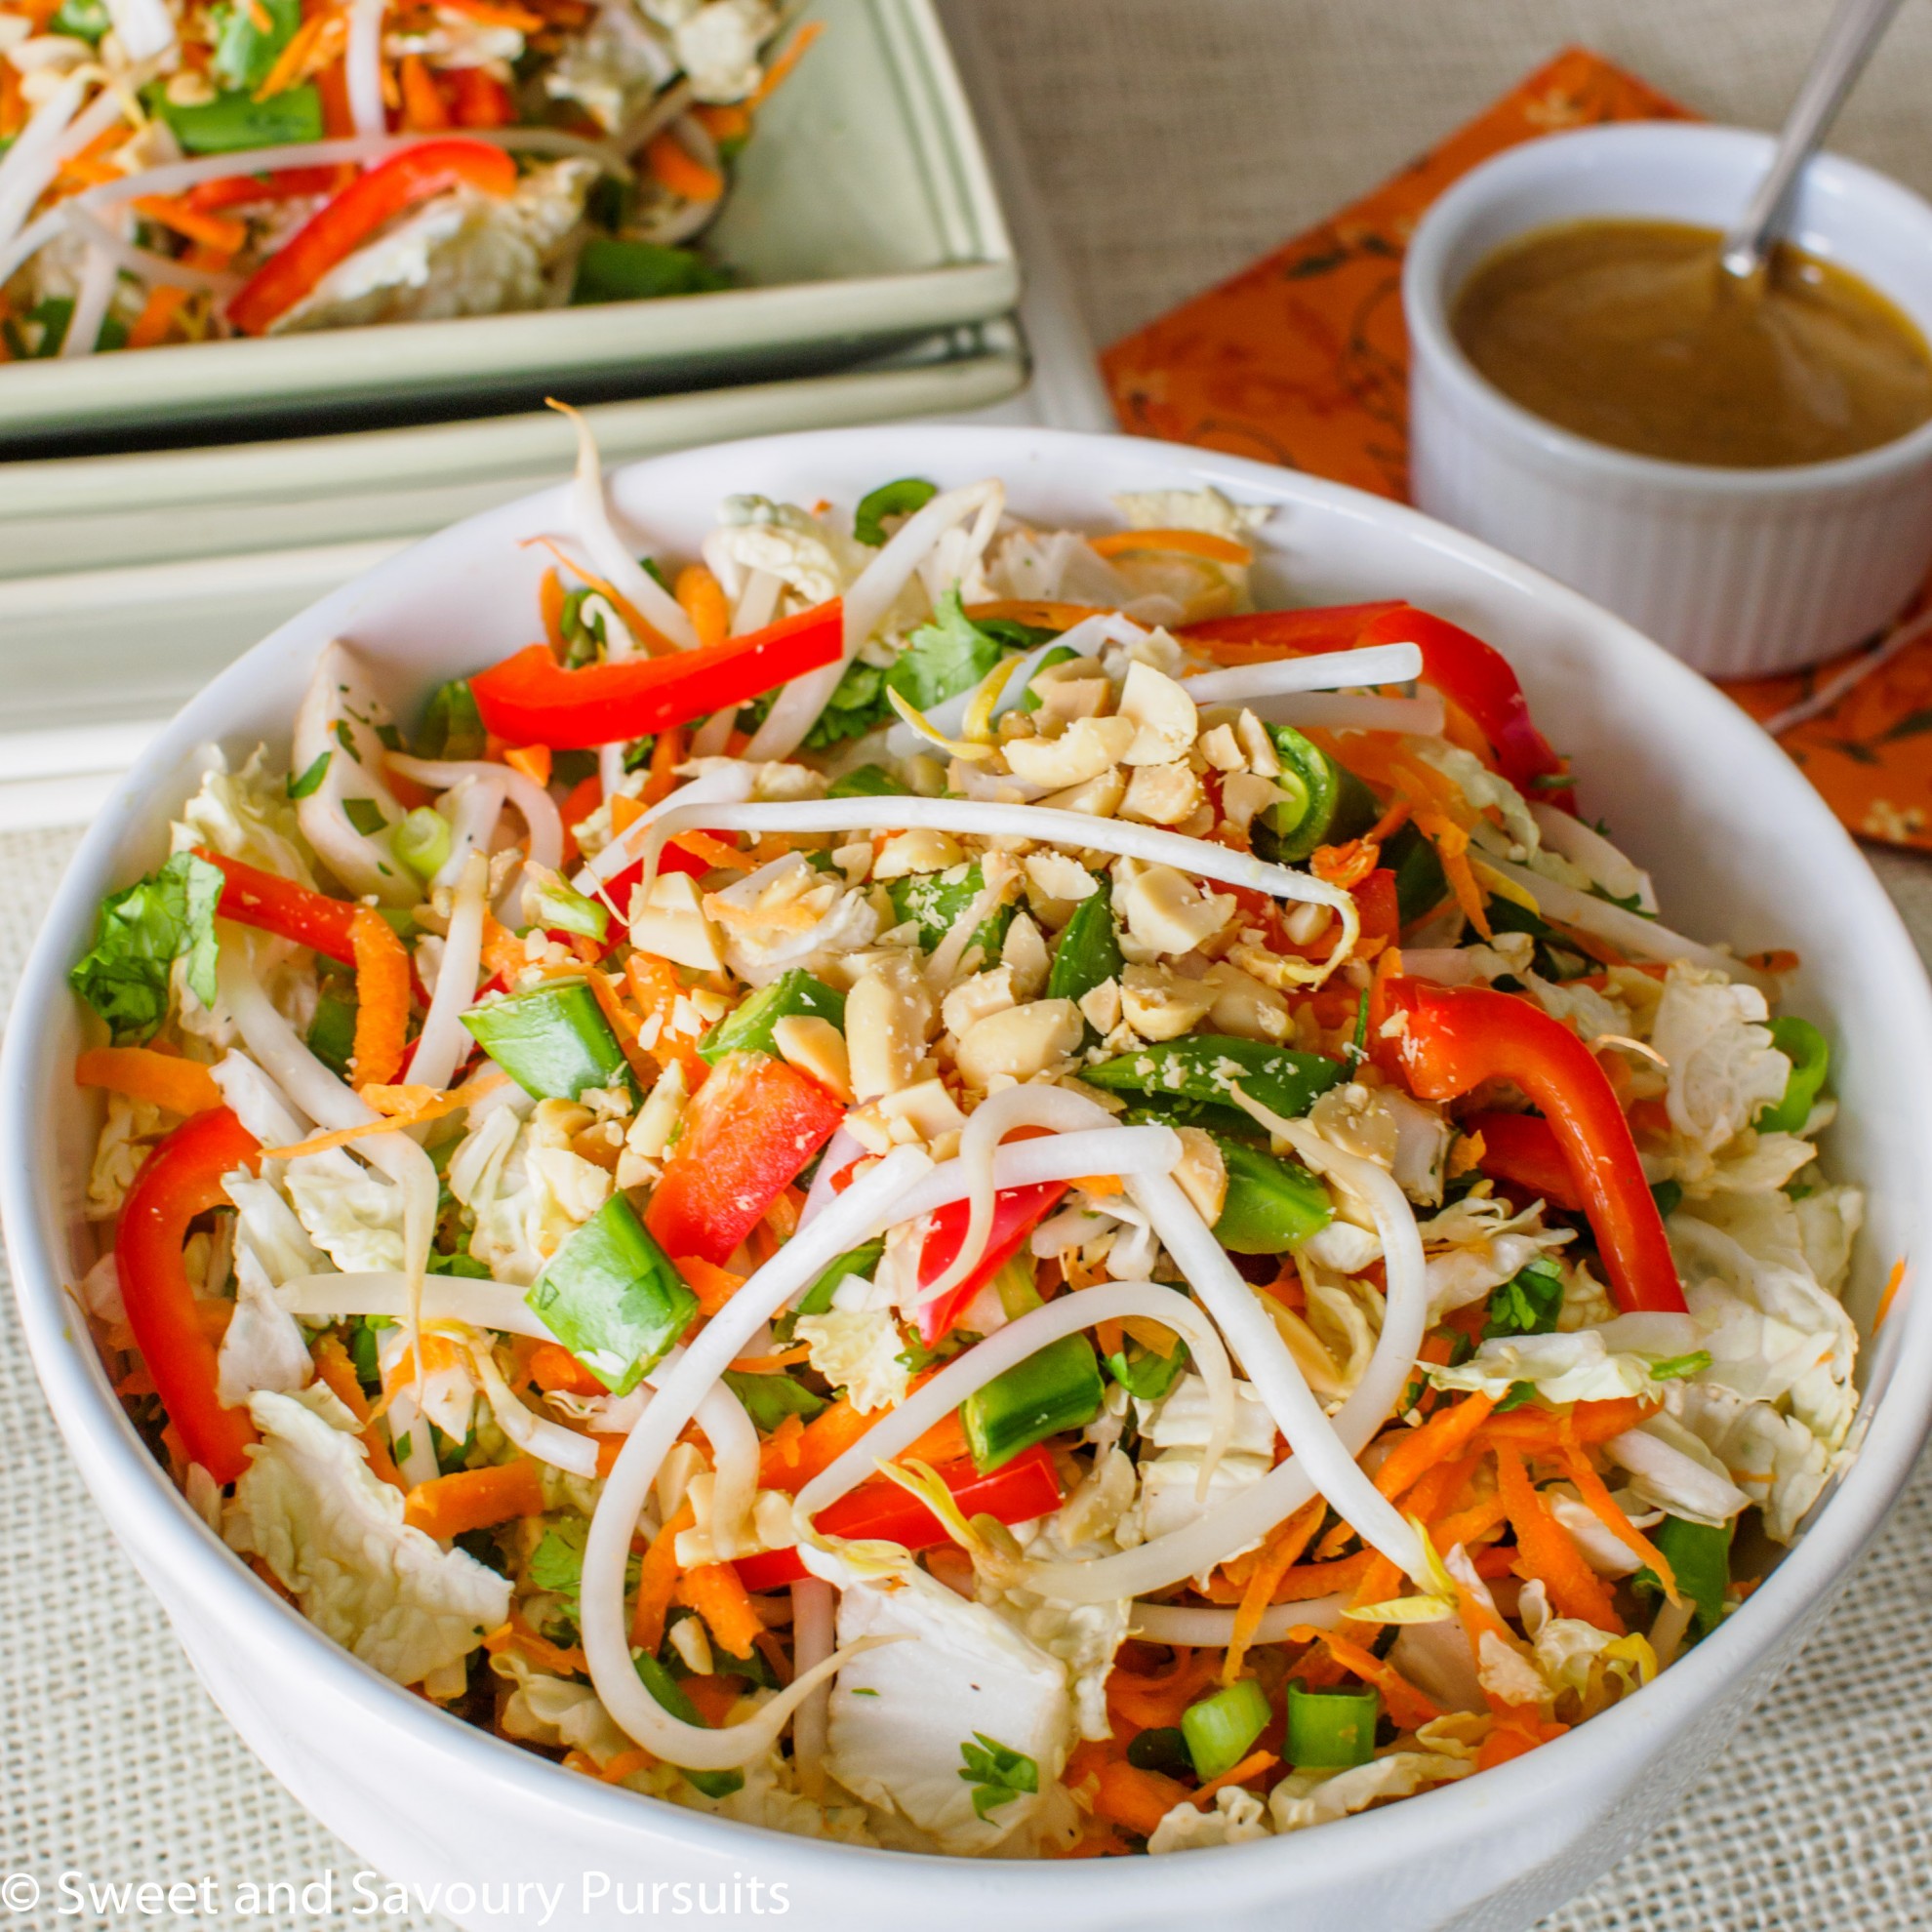 ASIAN SALAD WITH PEANUT BUTTER DRESSING